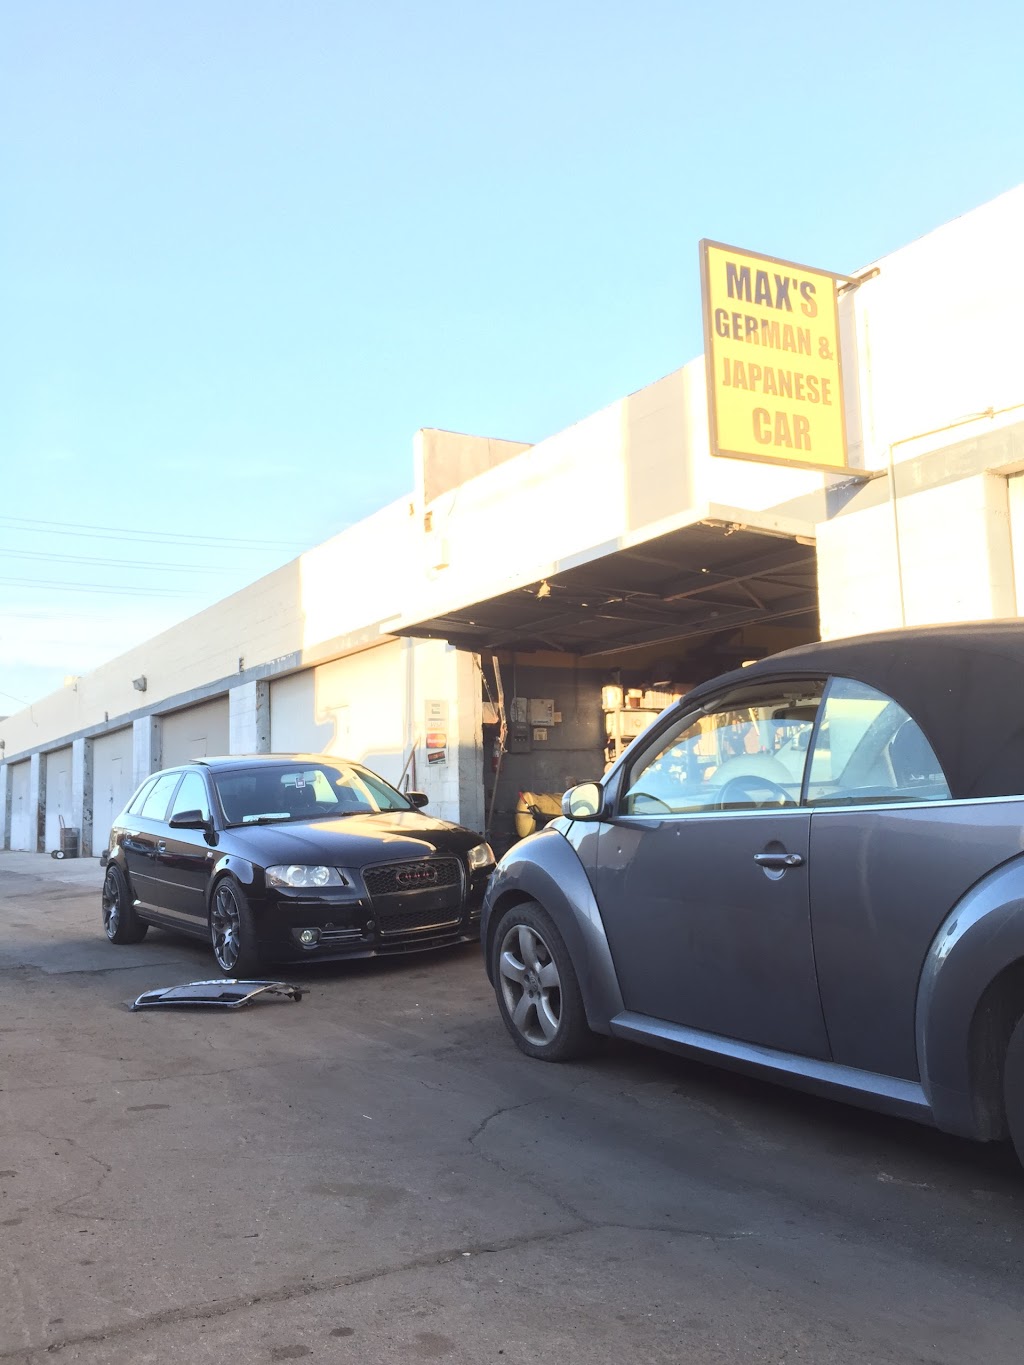 Maxs German and Japanese Car Service | 7622 Fountain Ave, West Hollywood, CA 90046, USA | Phone: (310) 804-4185